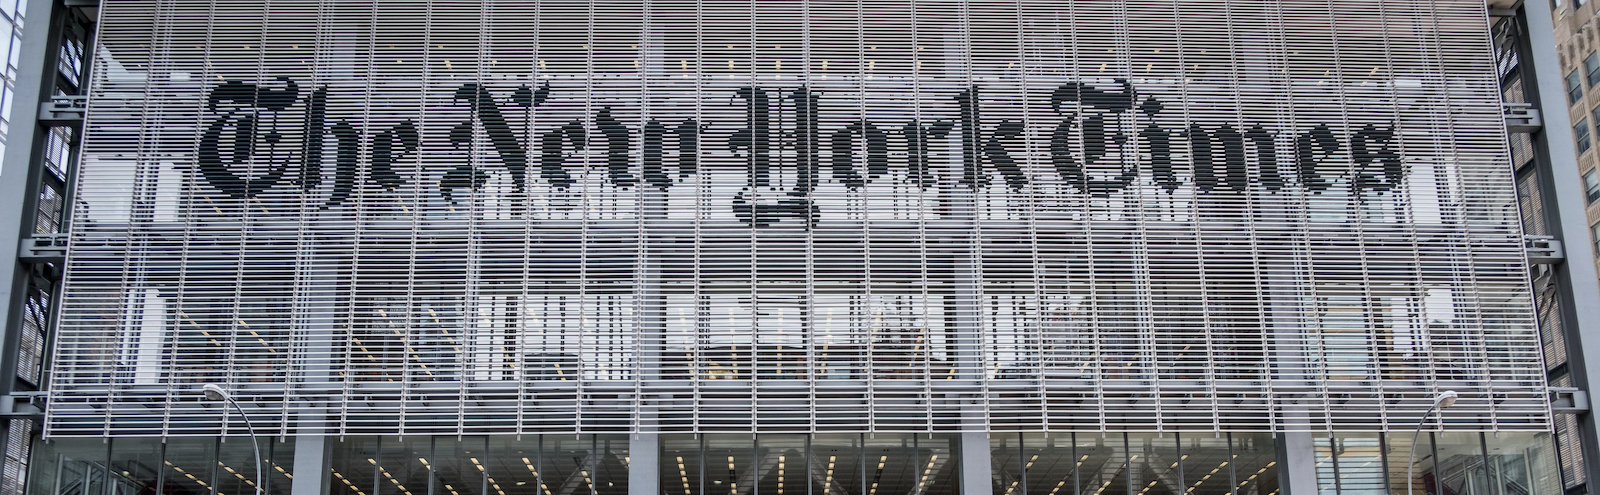 New York Times building